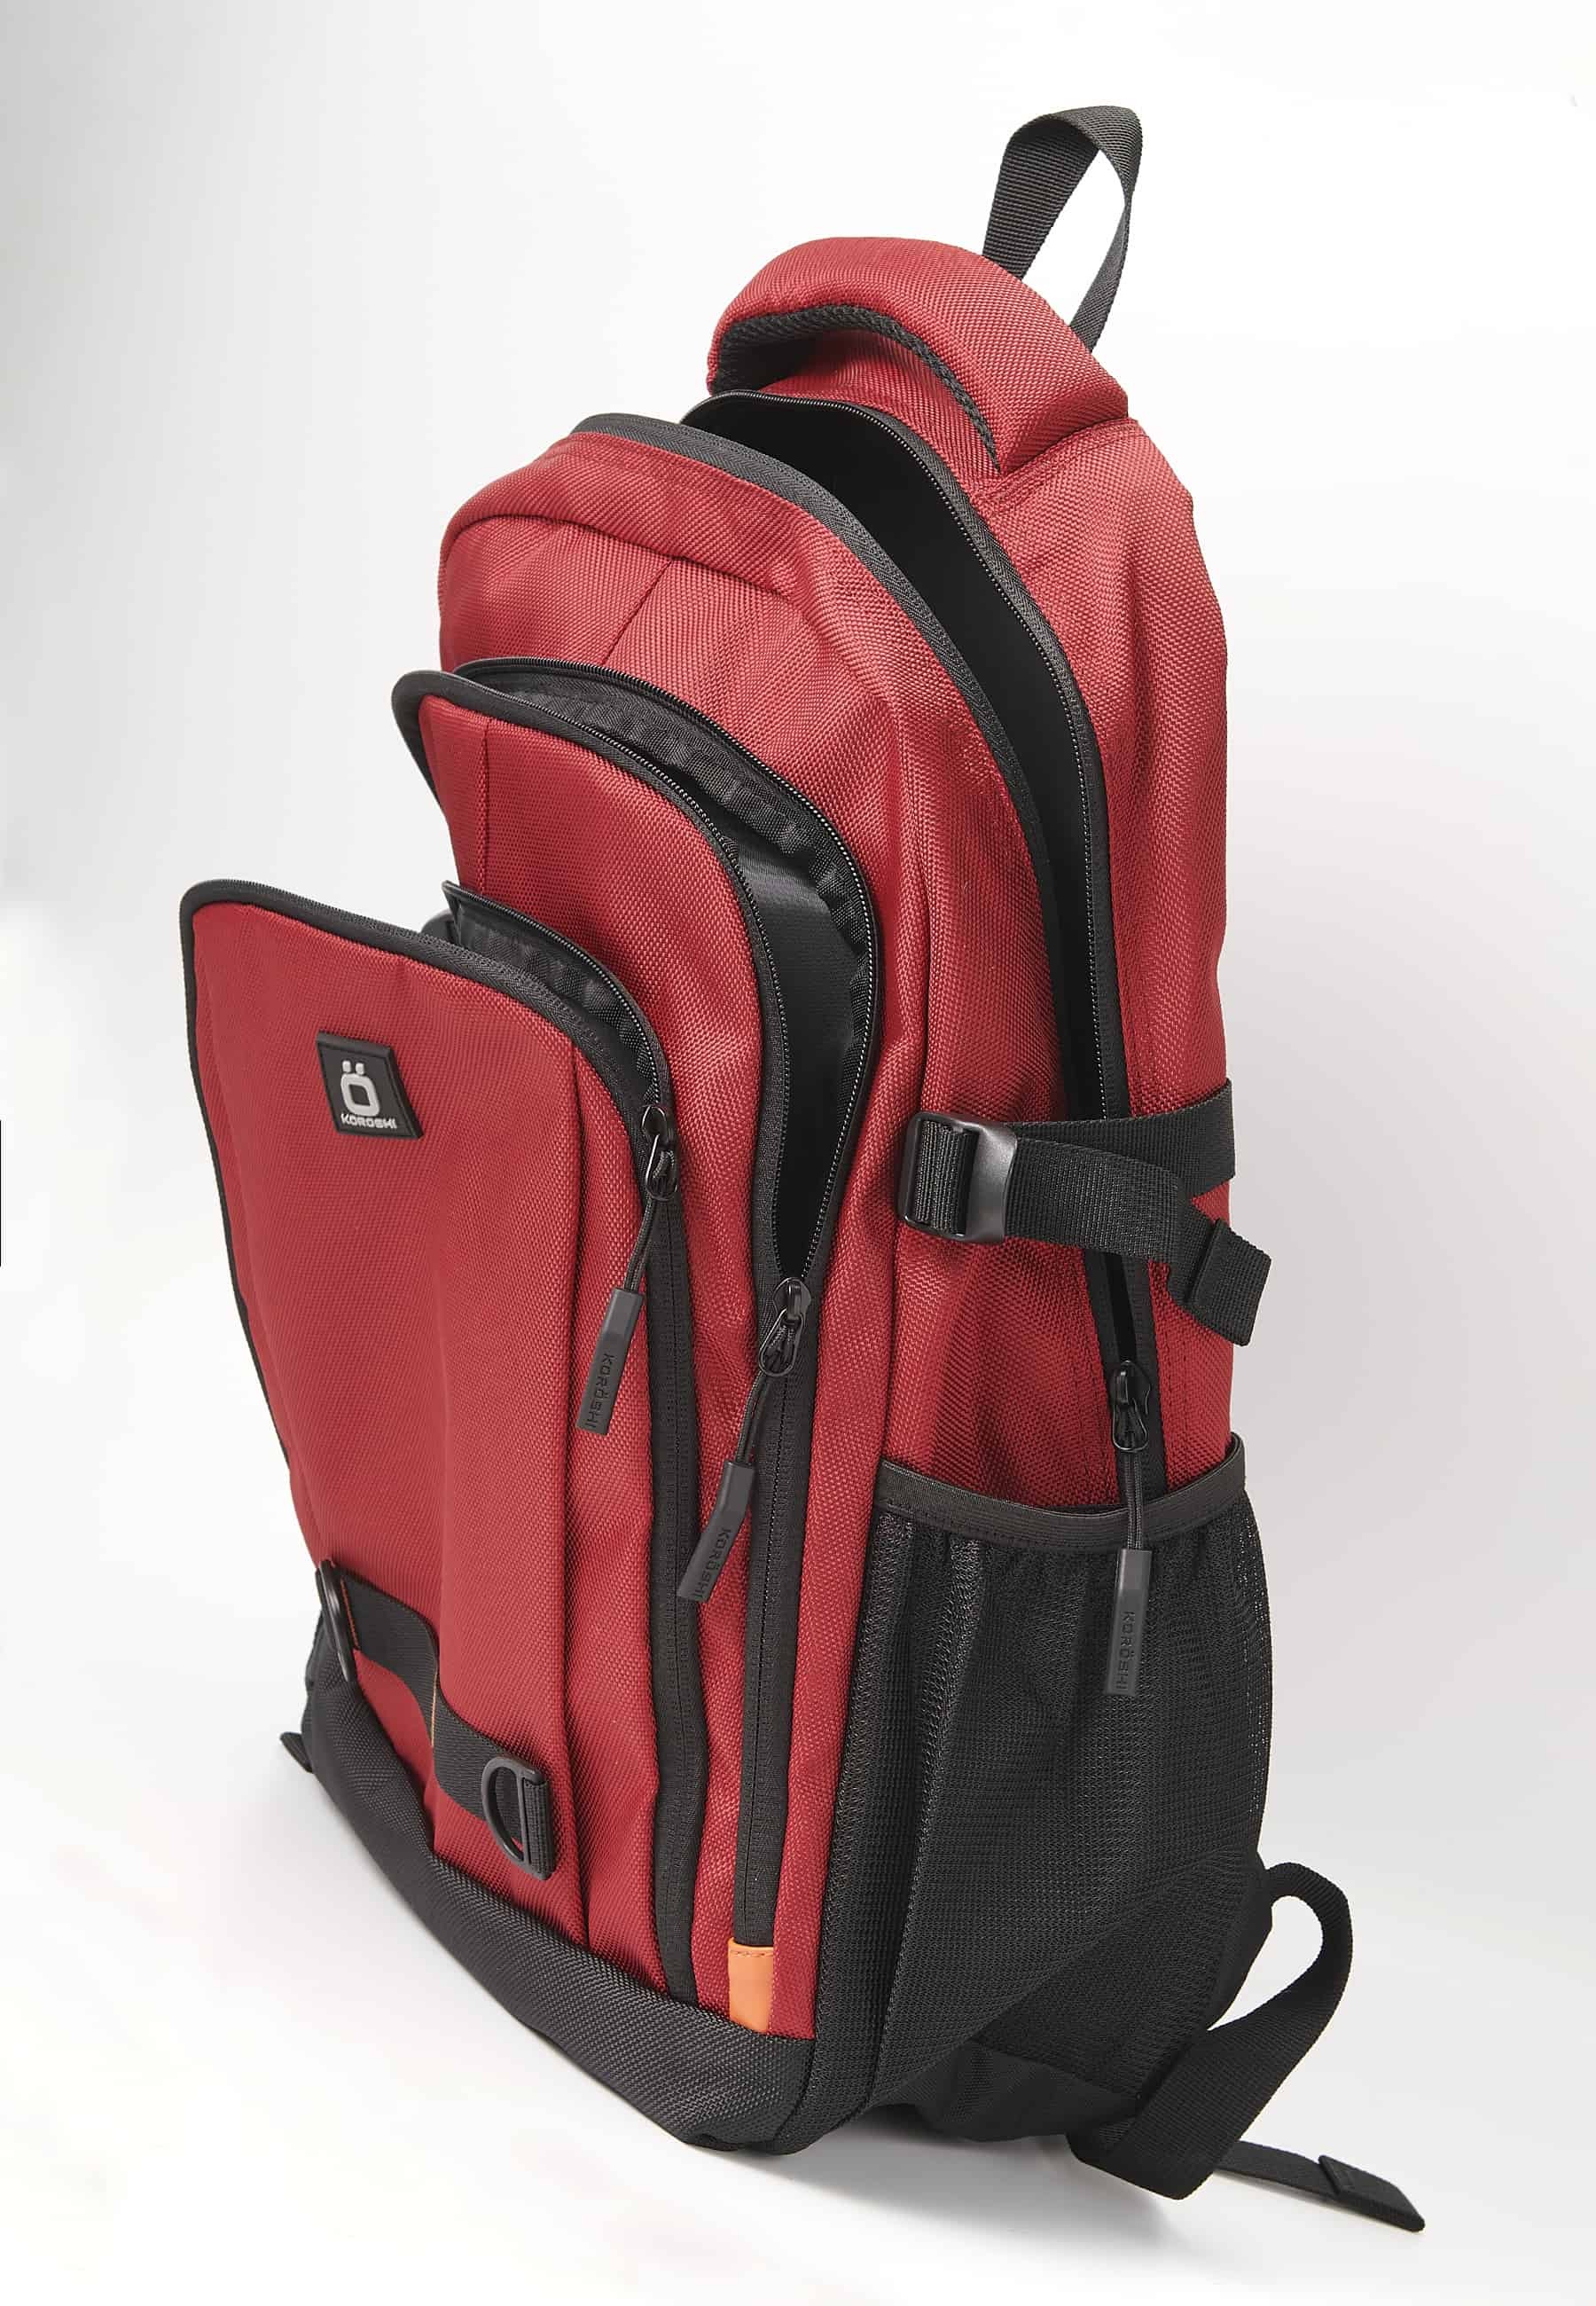 Koröshi backpack with three zippered compartments, one for laptop, with red interior pockets